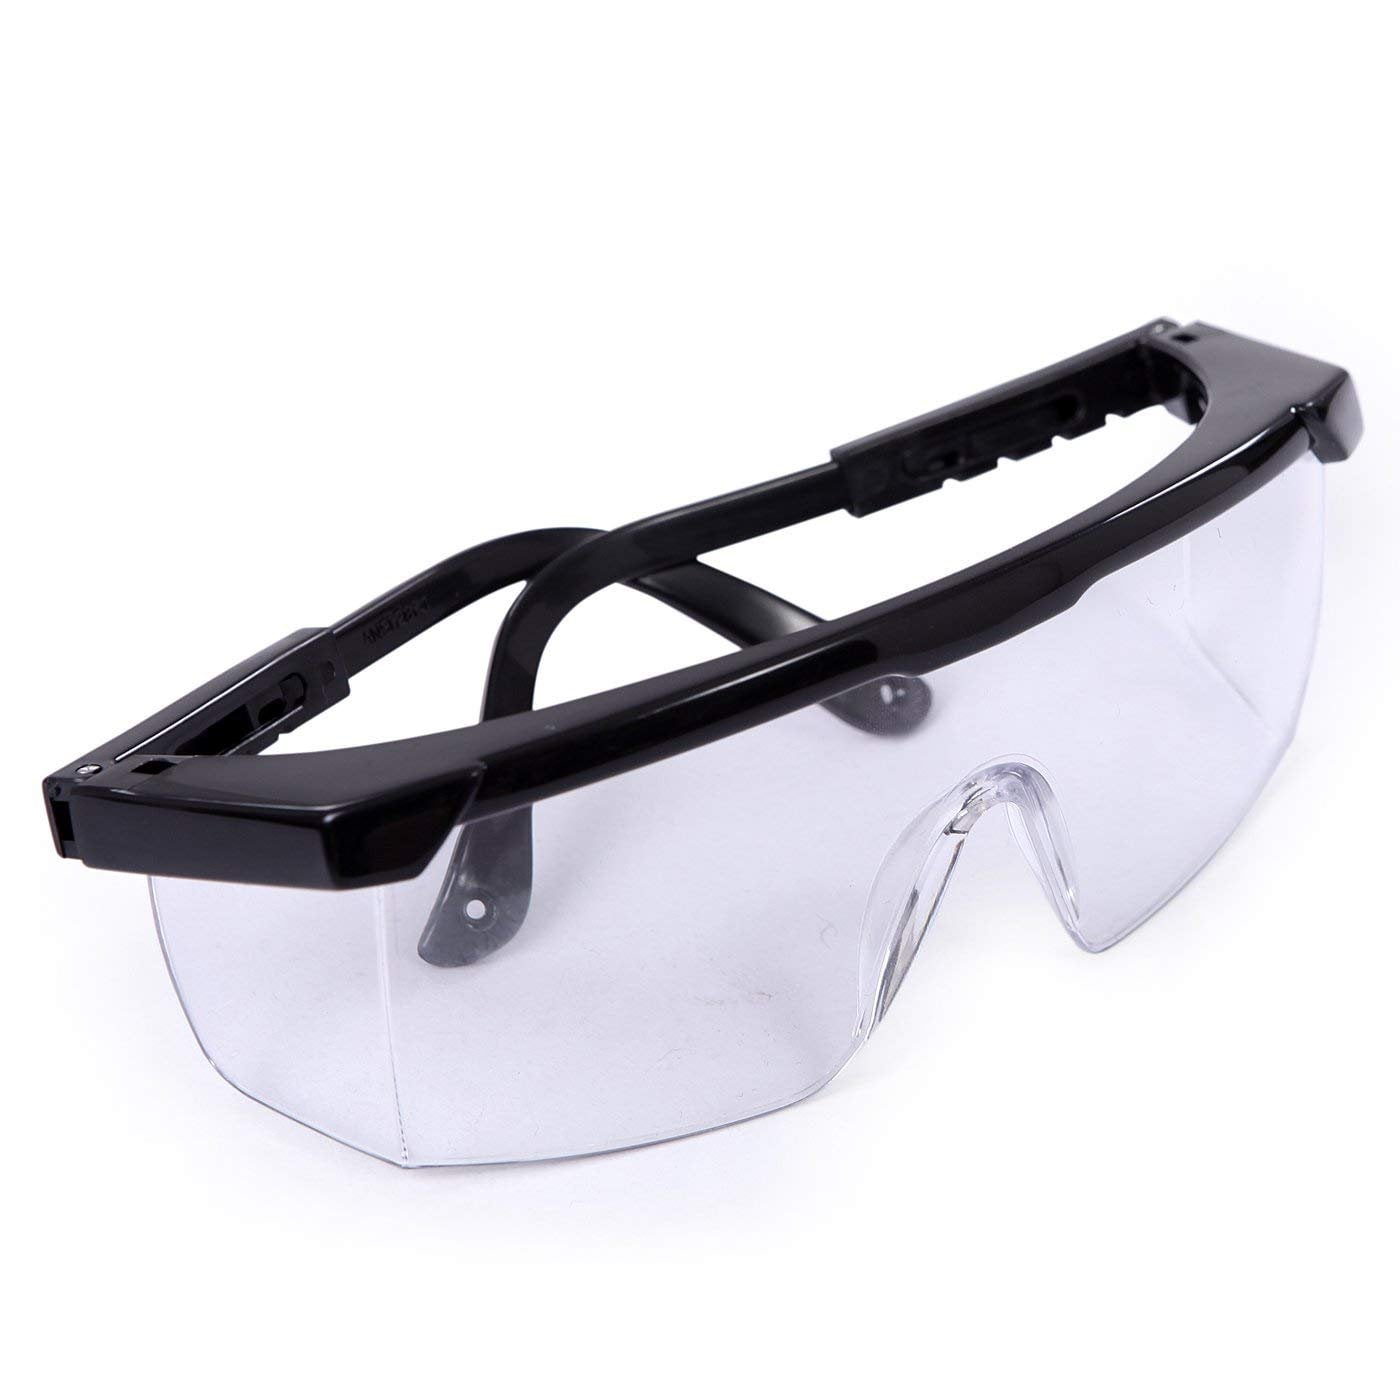 Details about   2PCS Laser Eye Protection Safety Glasses Goggles for UV Lasers/Beauty Protective 